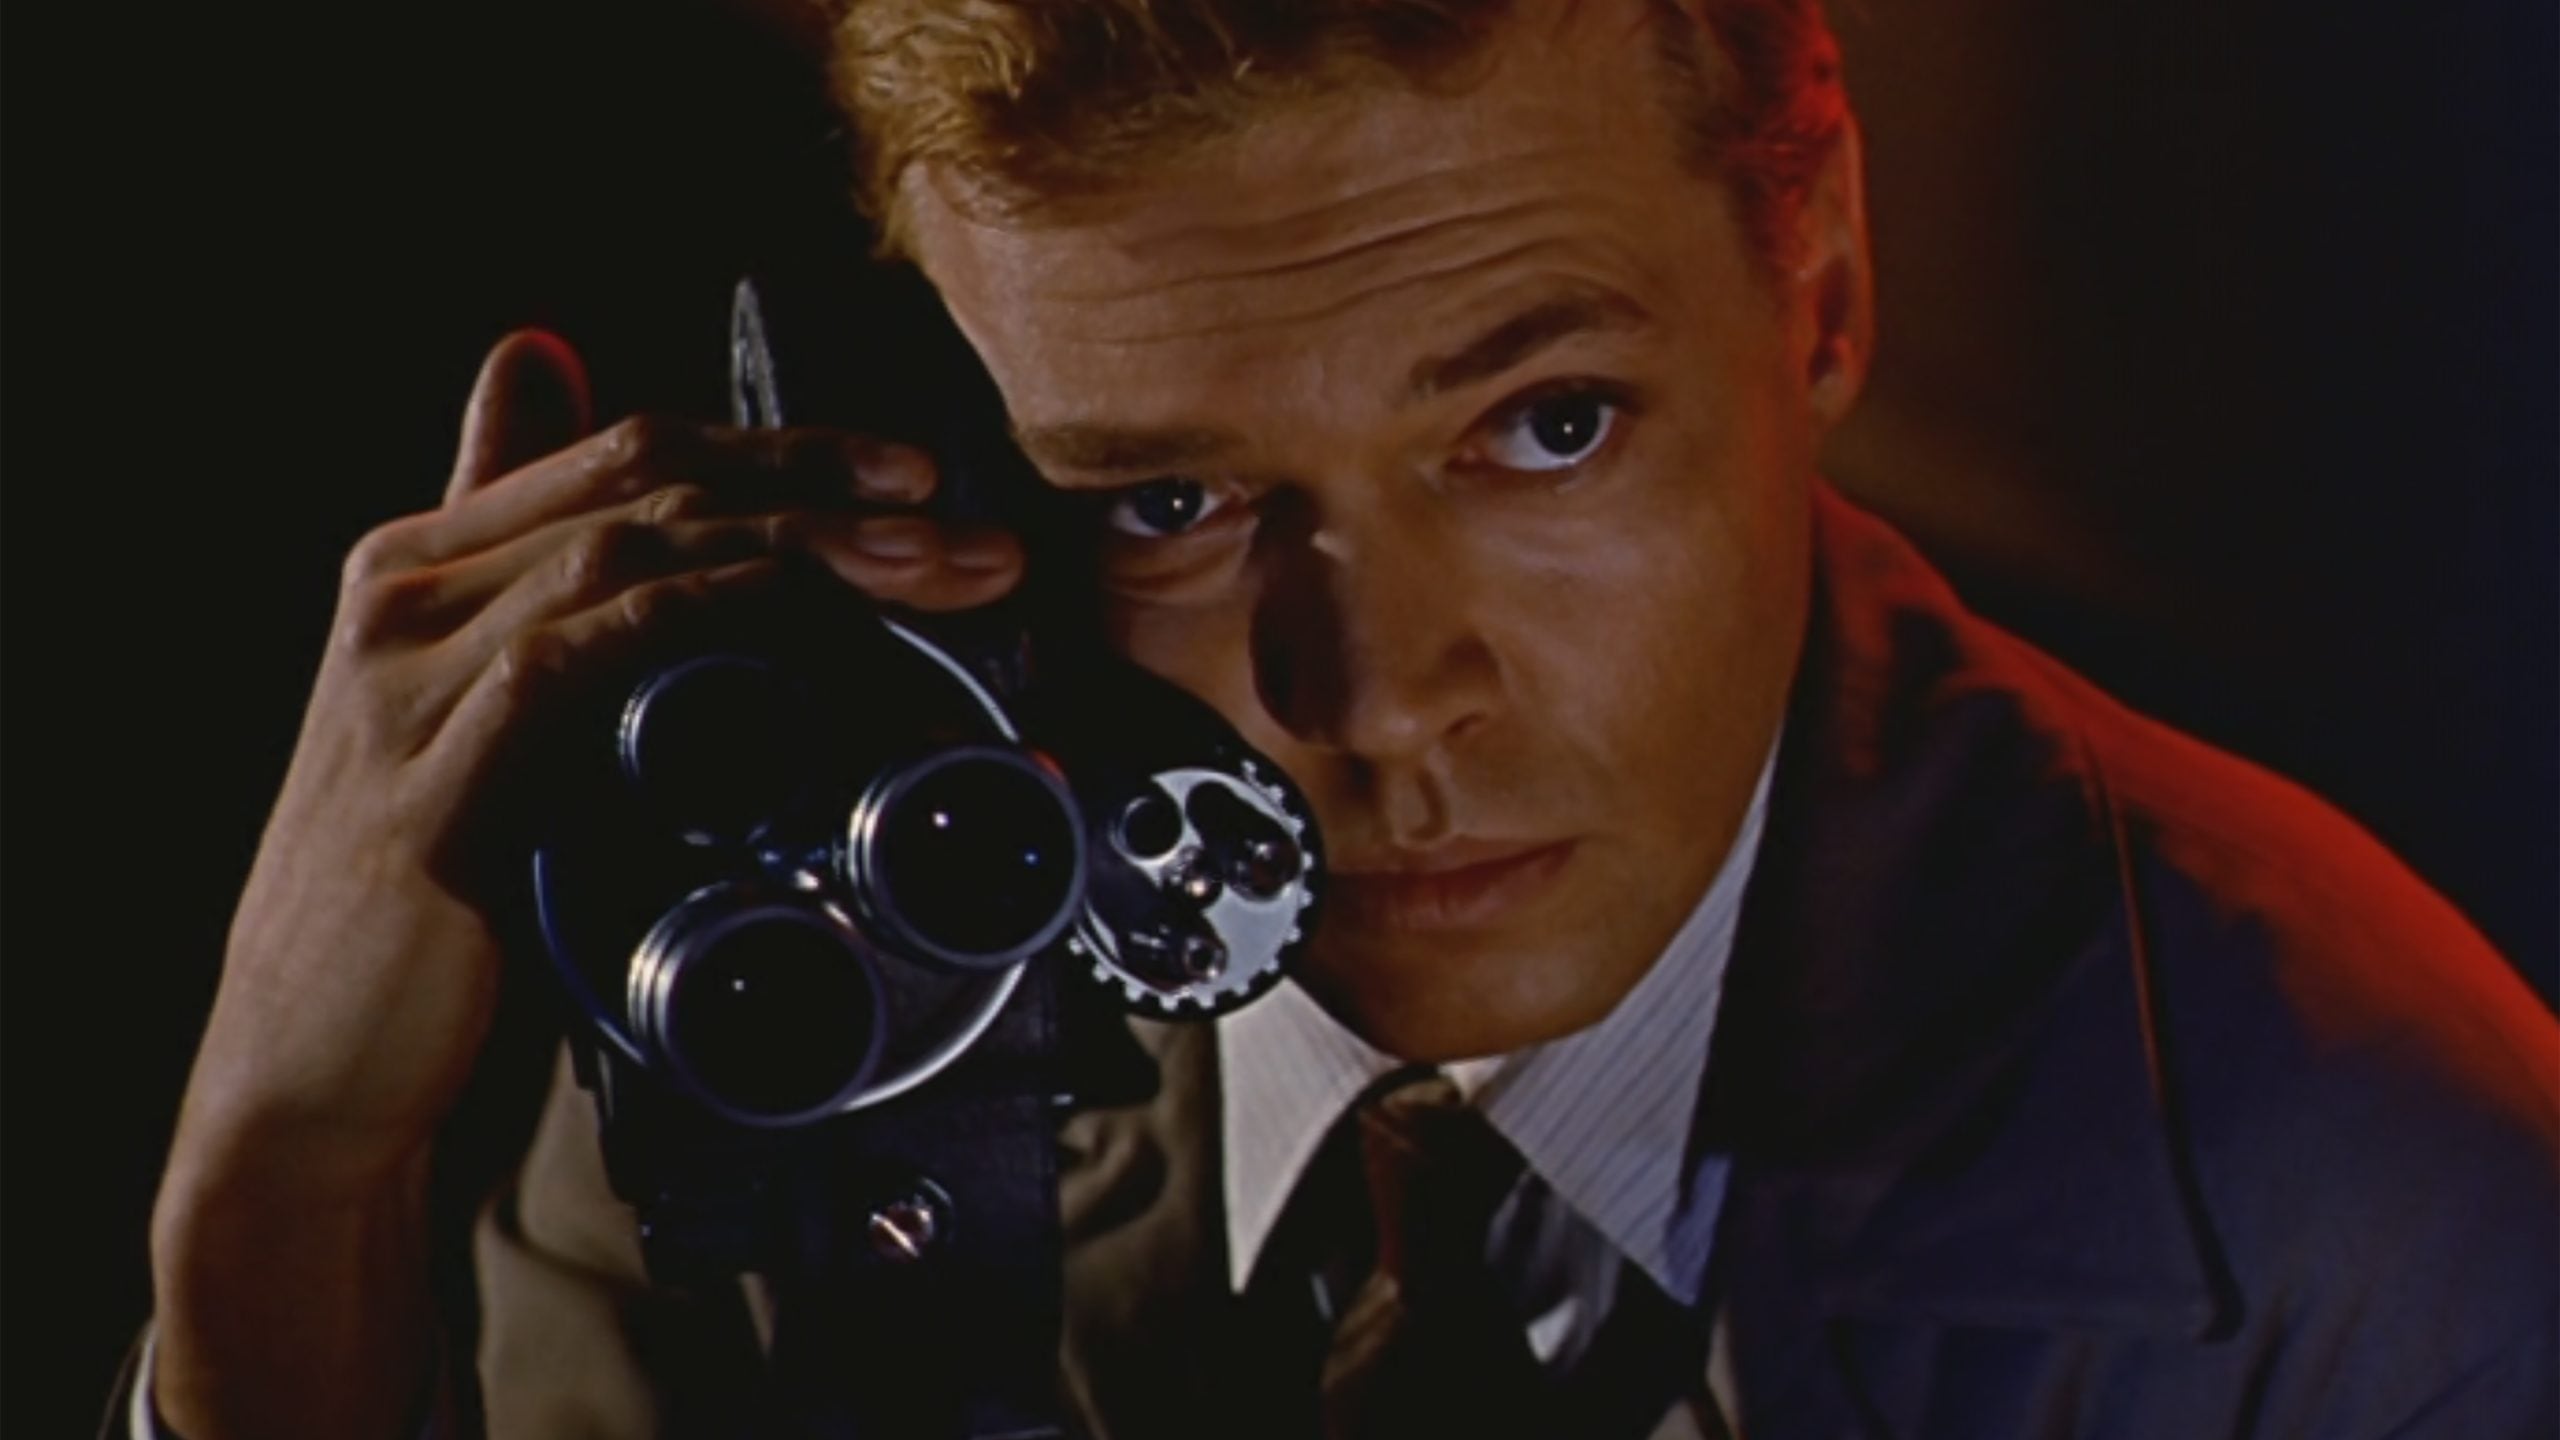 Carl Boehm in Michael Powell's Peeping Tom, now available in a 4K restoration from Studio Canal